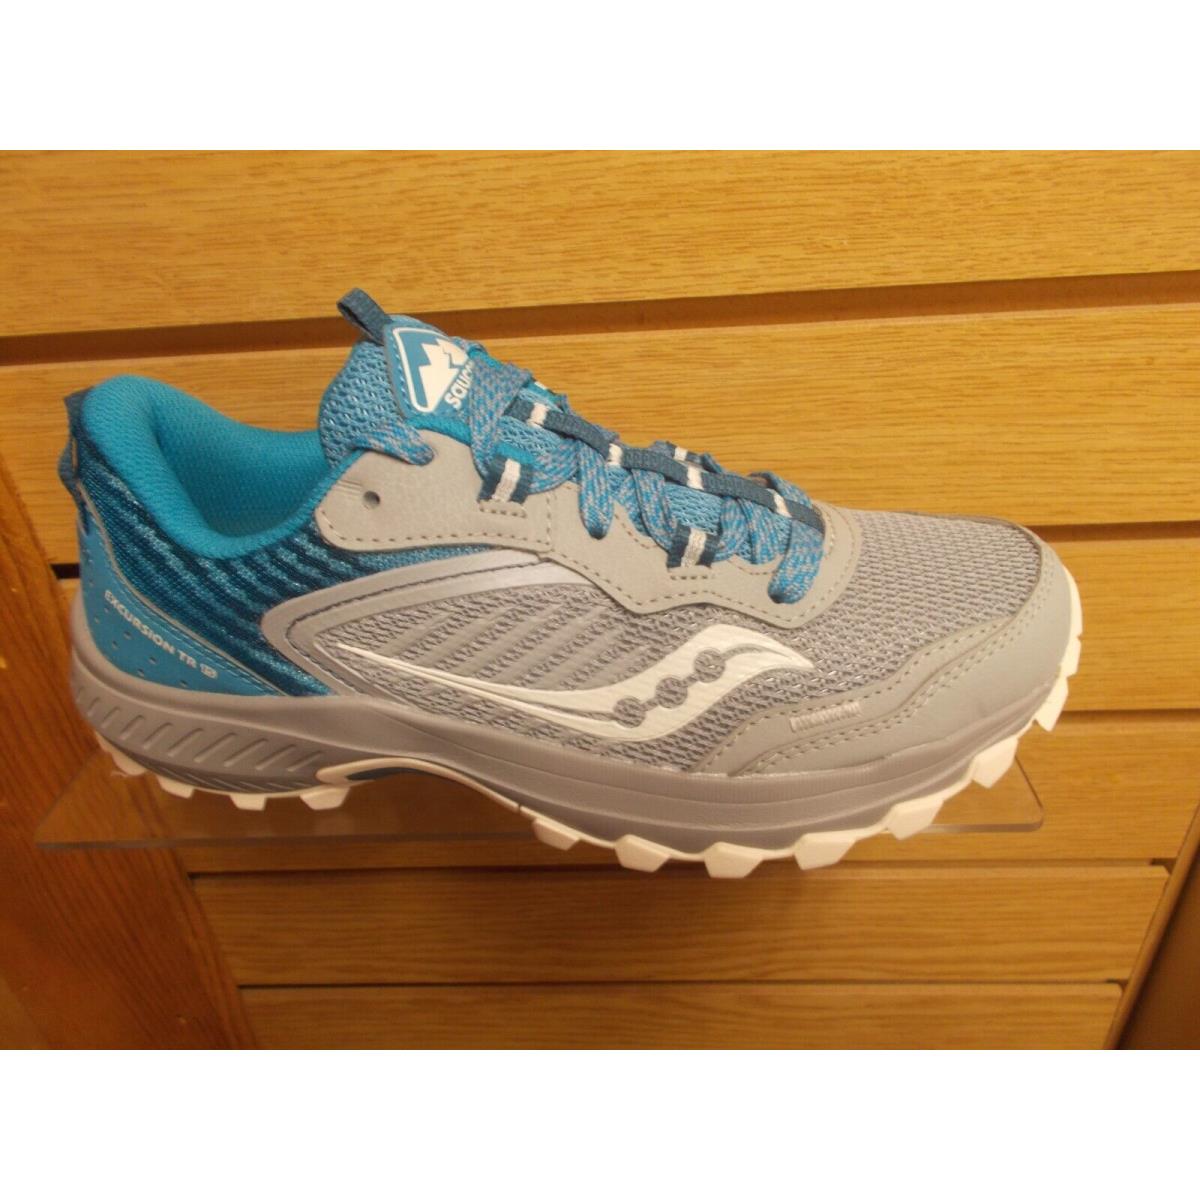 Saucony Women`s Excursion TR 15 All Terrain Med B Grey/blue Running Shoes